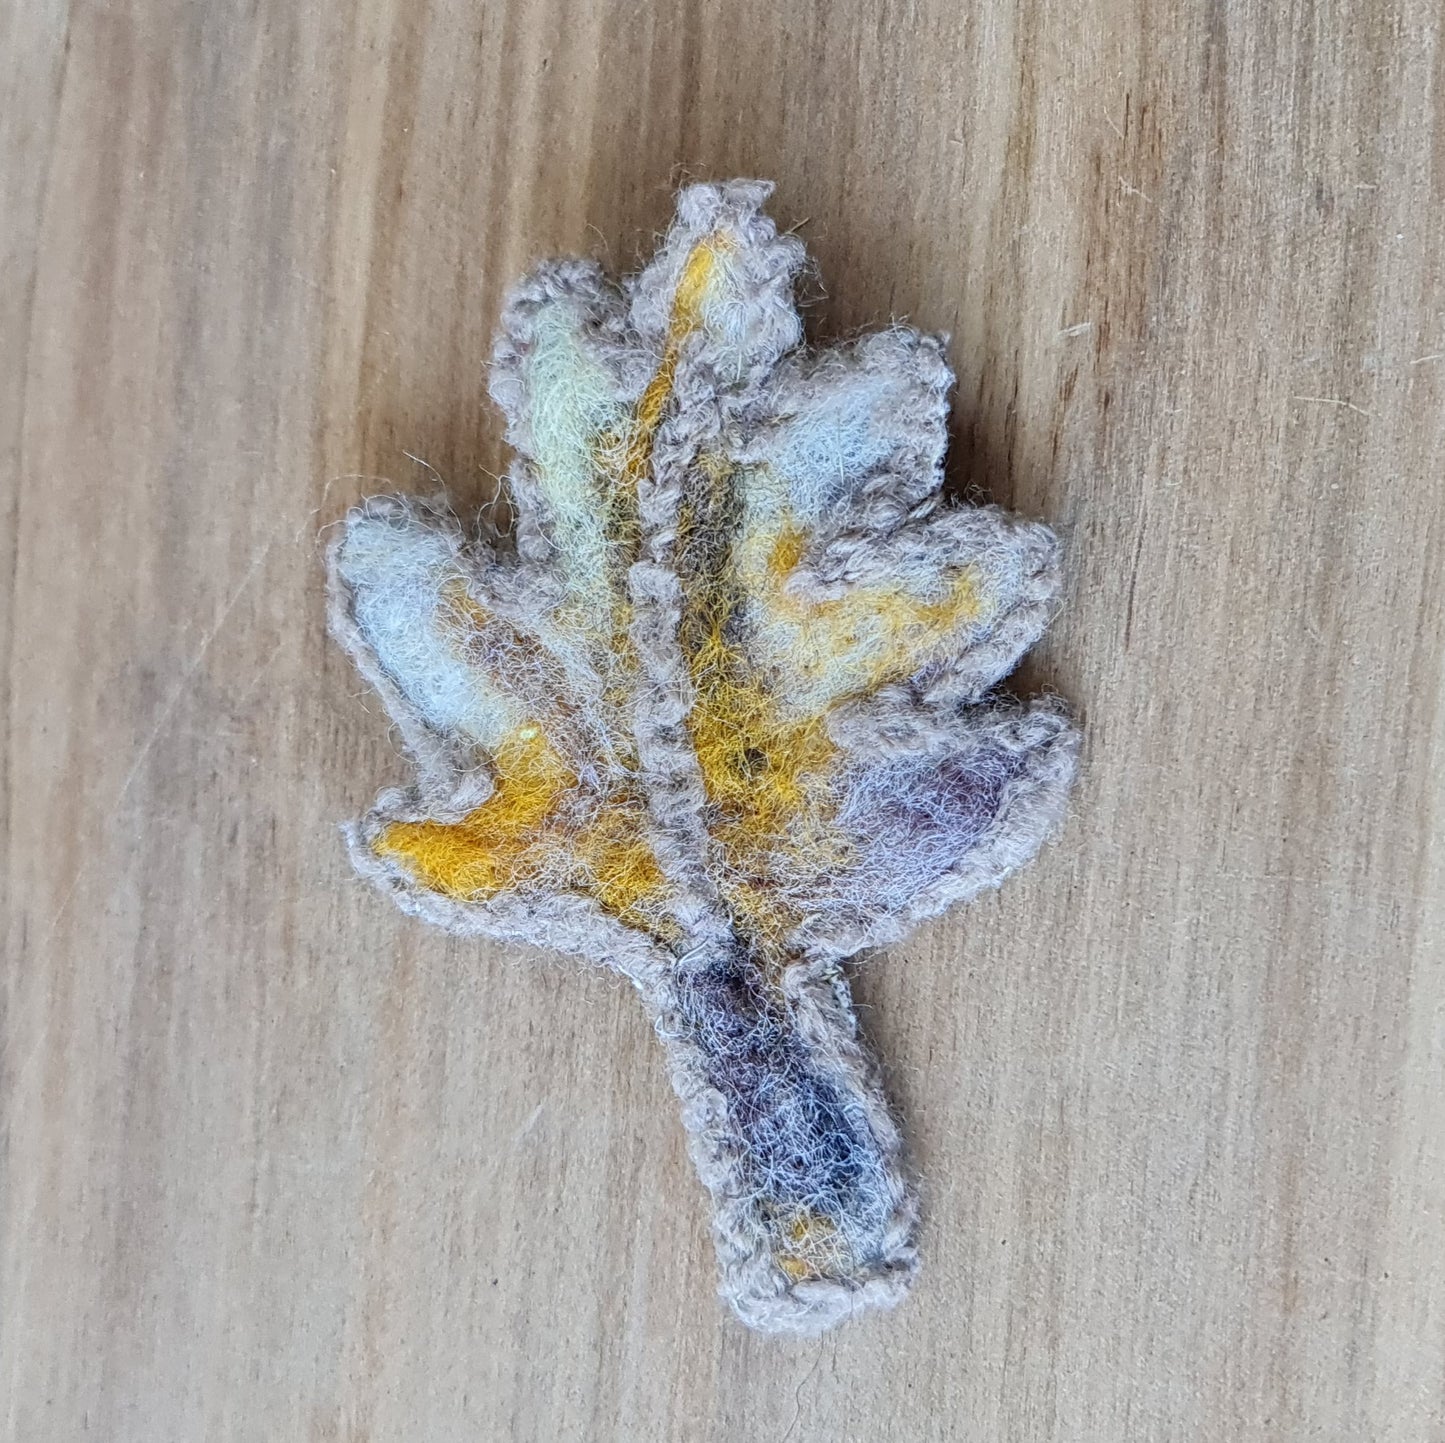 Felt brooch in the shape of a leaf / in brownish gray tones 10 x 7 cm (AMA)